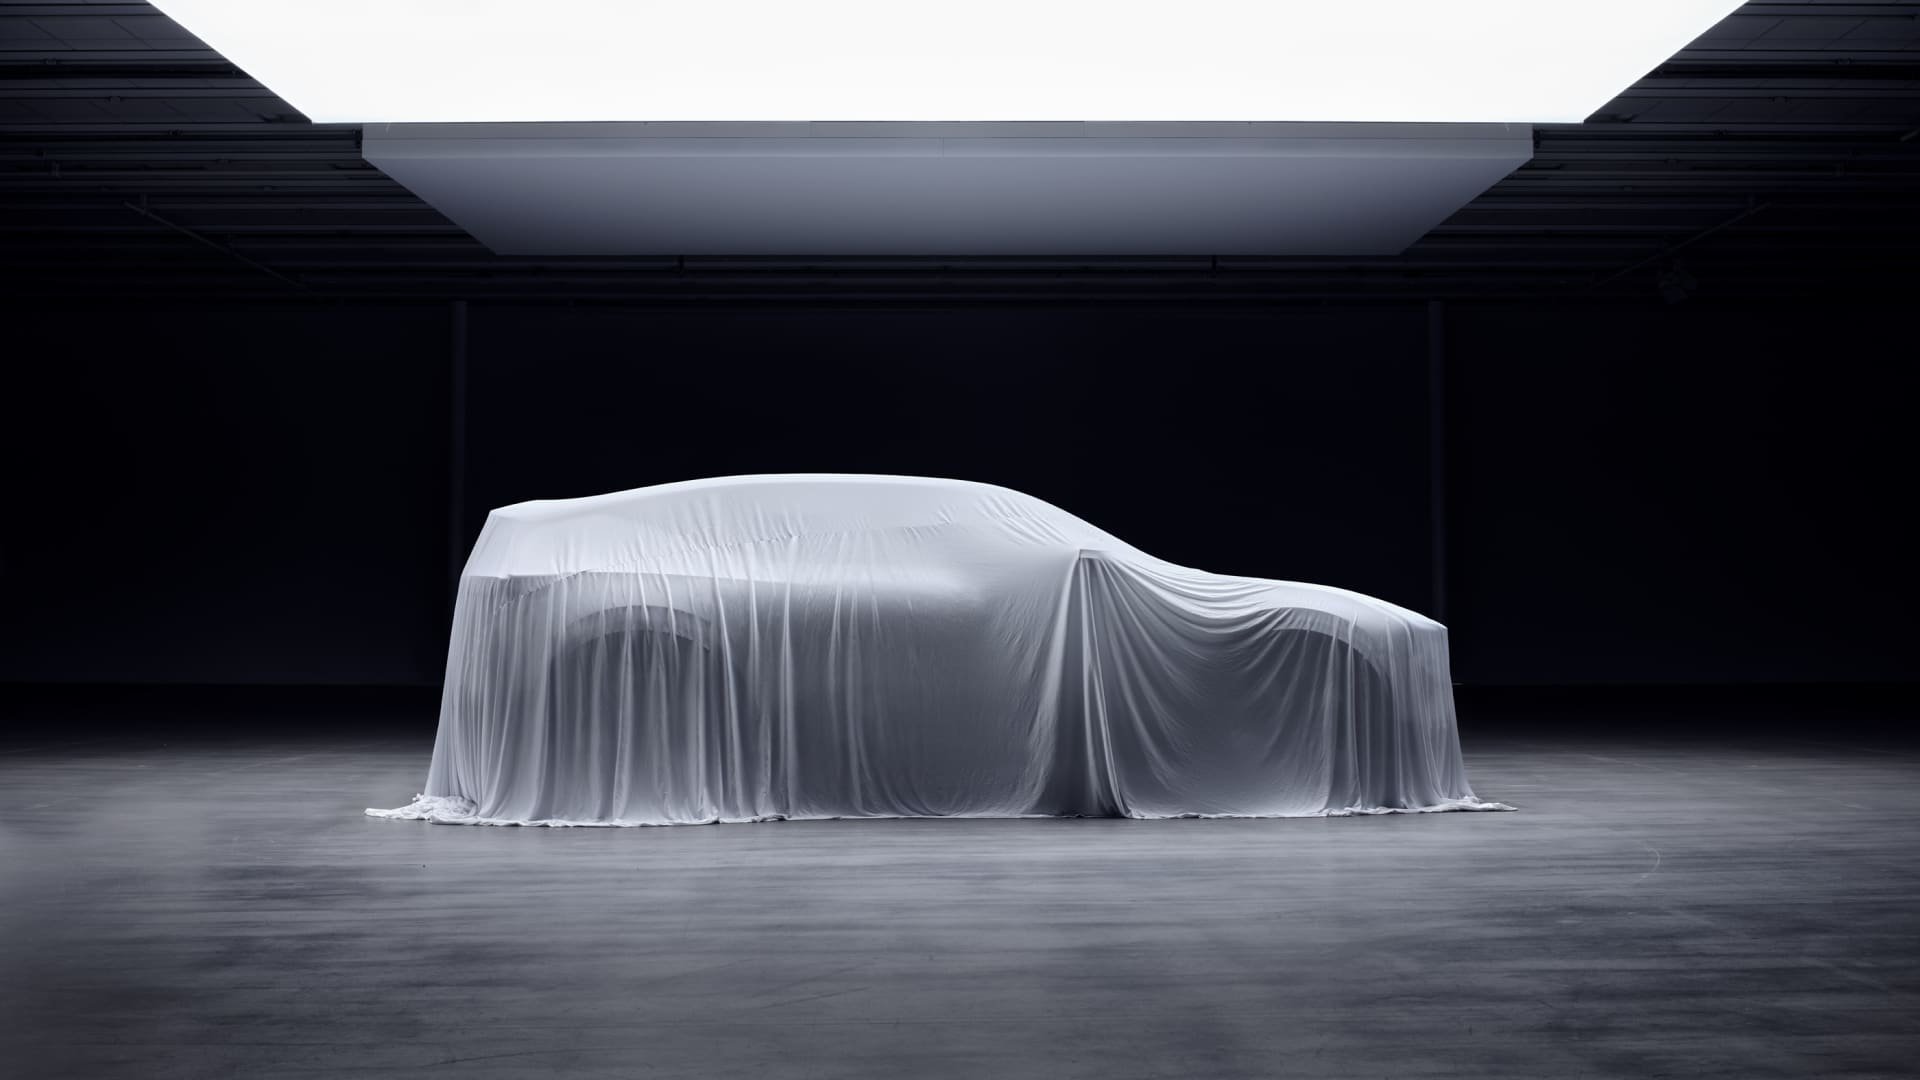 Polestar released this teaser image on June 16, 2021 of its upcoming Polestar 3 EV SUV, which will be produced by Volvo at a plant in South Carolina.